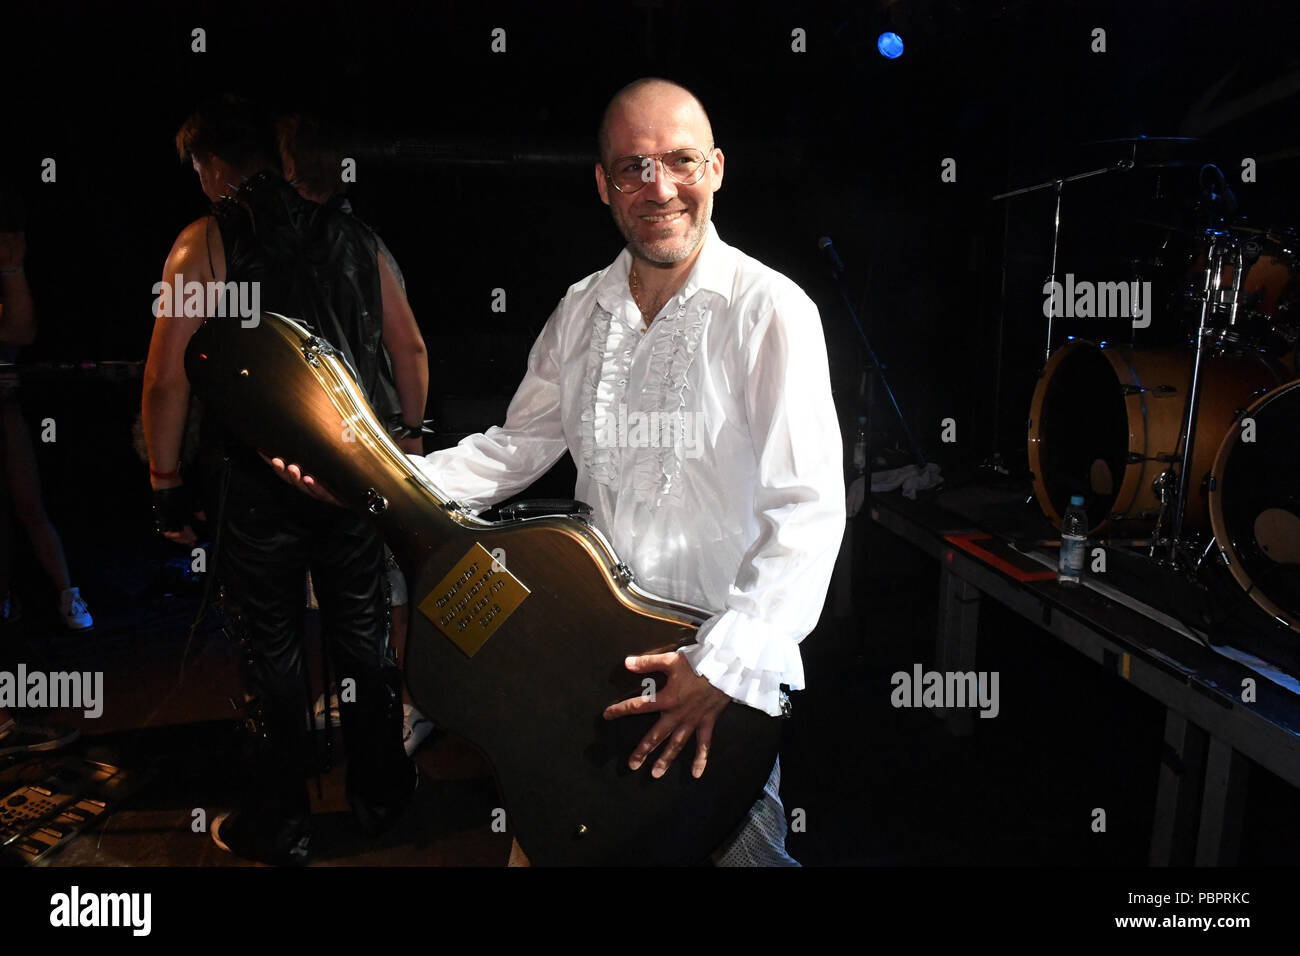 Bavaria, Germany. 28th July, 2018. The winner, Patrick 'Ehrwolf' Culek, standing on stage after the award ceremony in the backstage of the 15th German Air Guitar Championship and celebrating his trophy, an air guitar case. Credit: Felix Hörhager/dpa/Alamy Live News Stock Photo